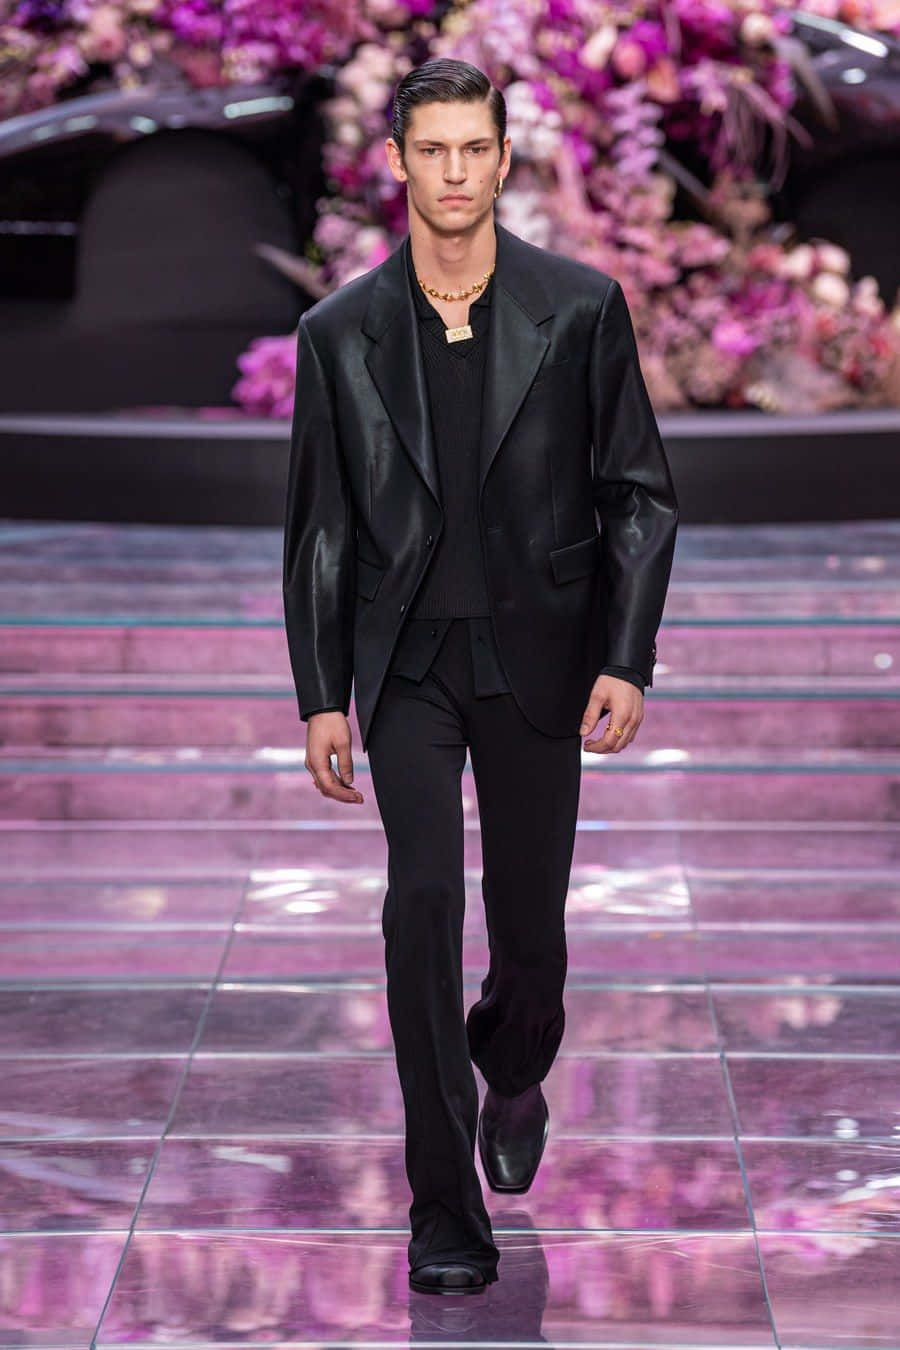 A Man In Black Suits Walks Down The Runway